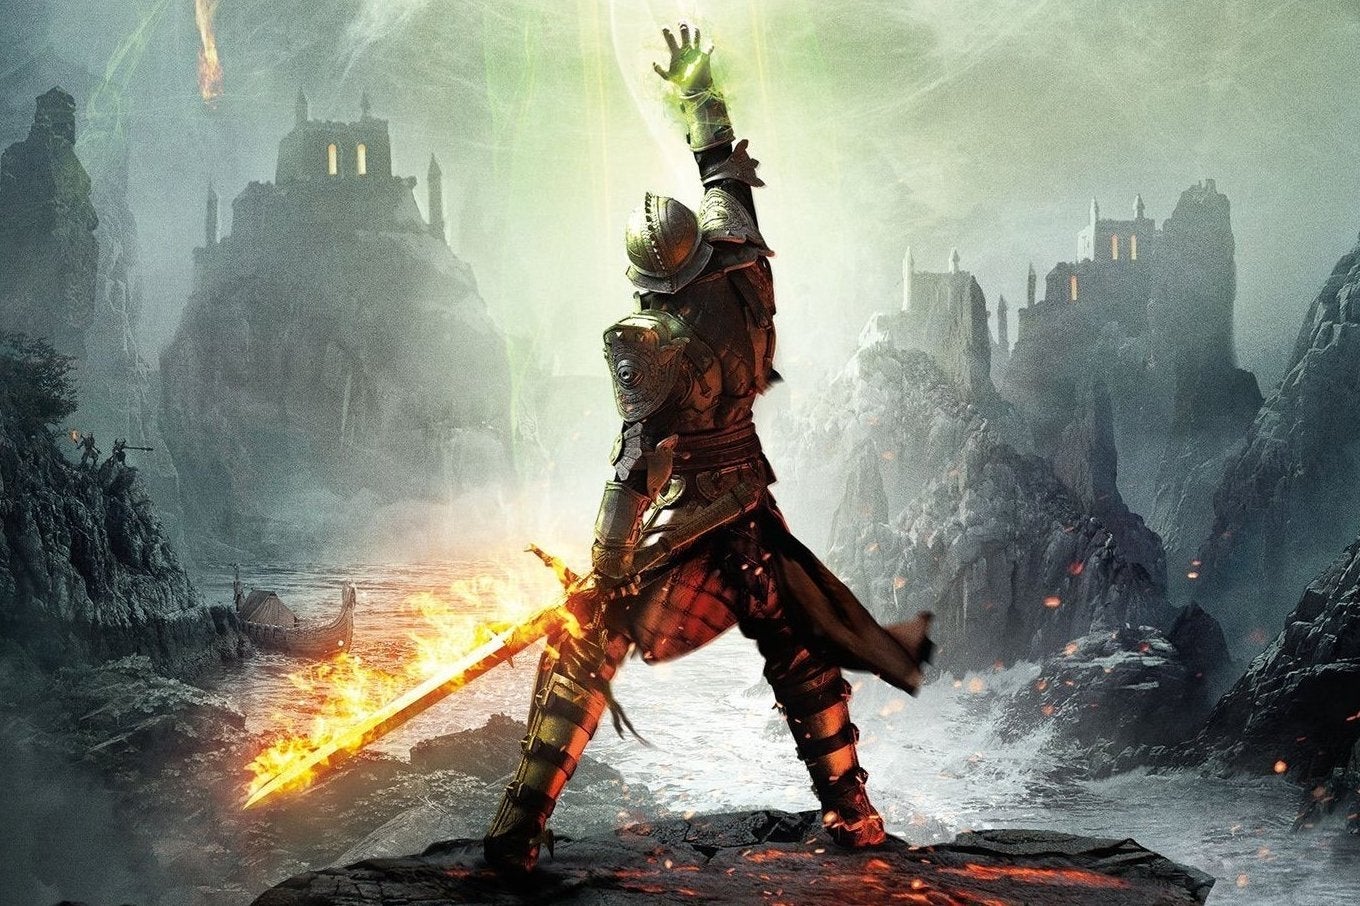 Image for Dragon Age Inquisition's horse sprinting was actually an illusion